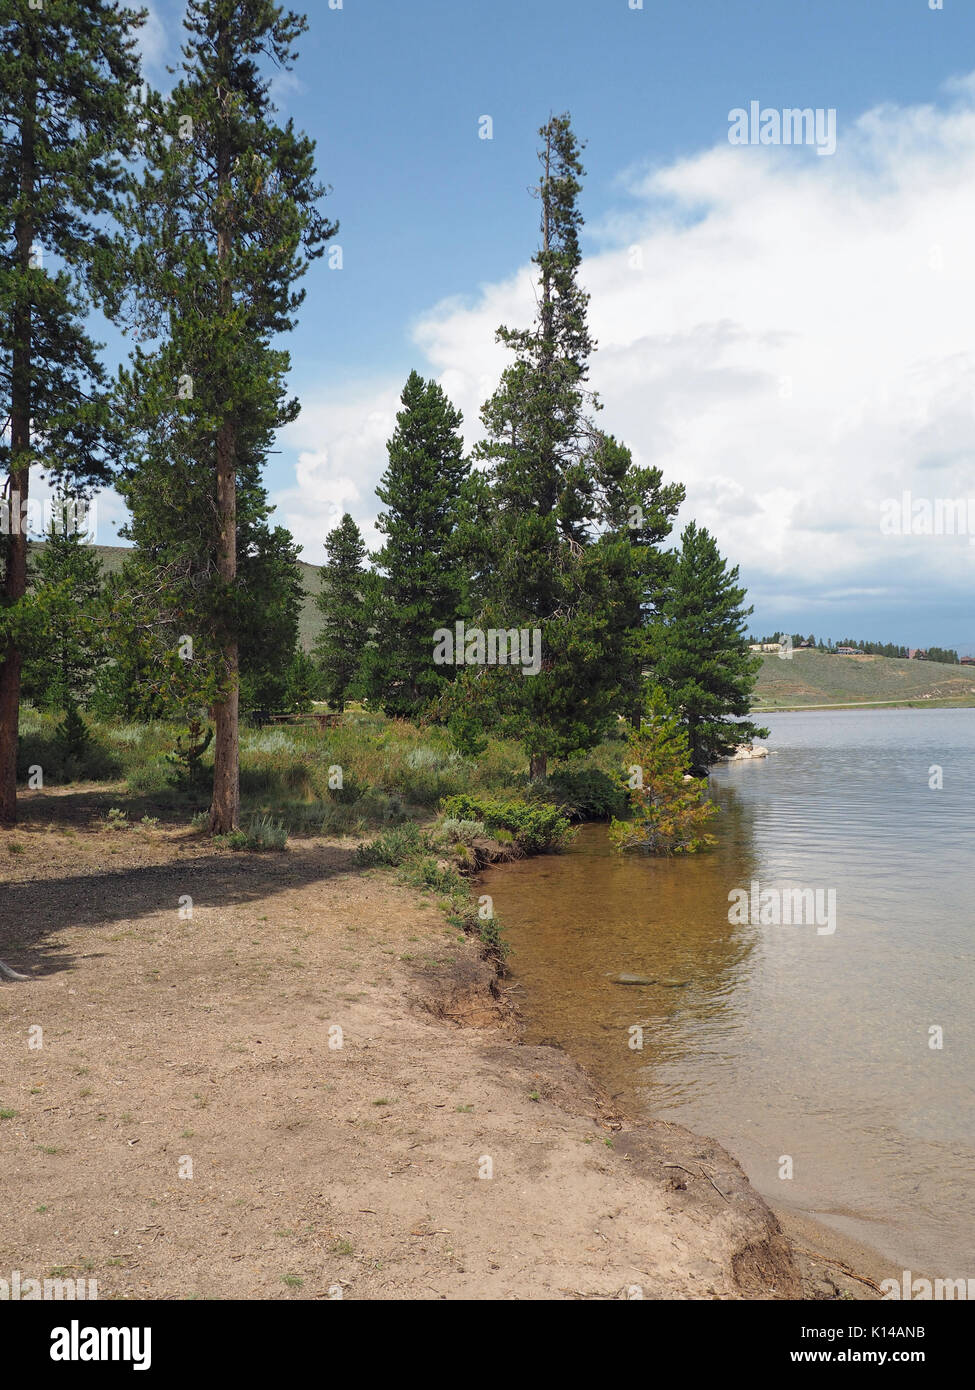 A small clearing by the Granby Lake in Colorado.  There are evergreen trees.  The sky overhead is bright blue with white puffy clouds. Stock Photo